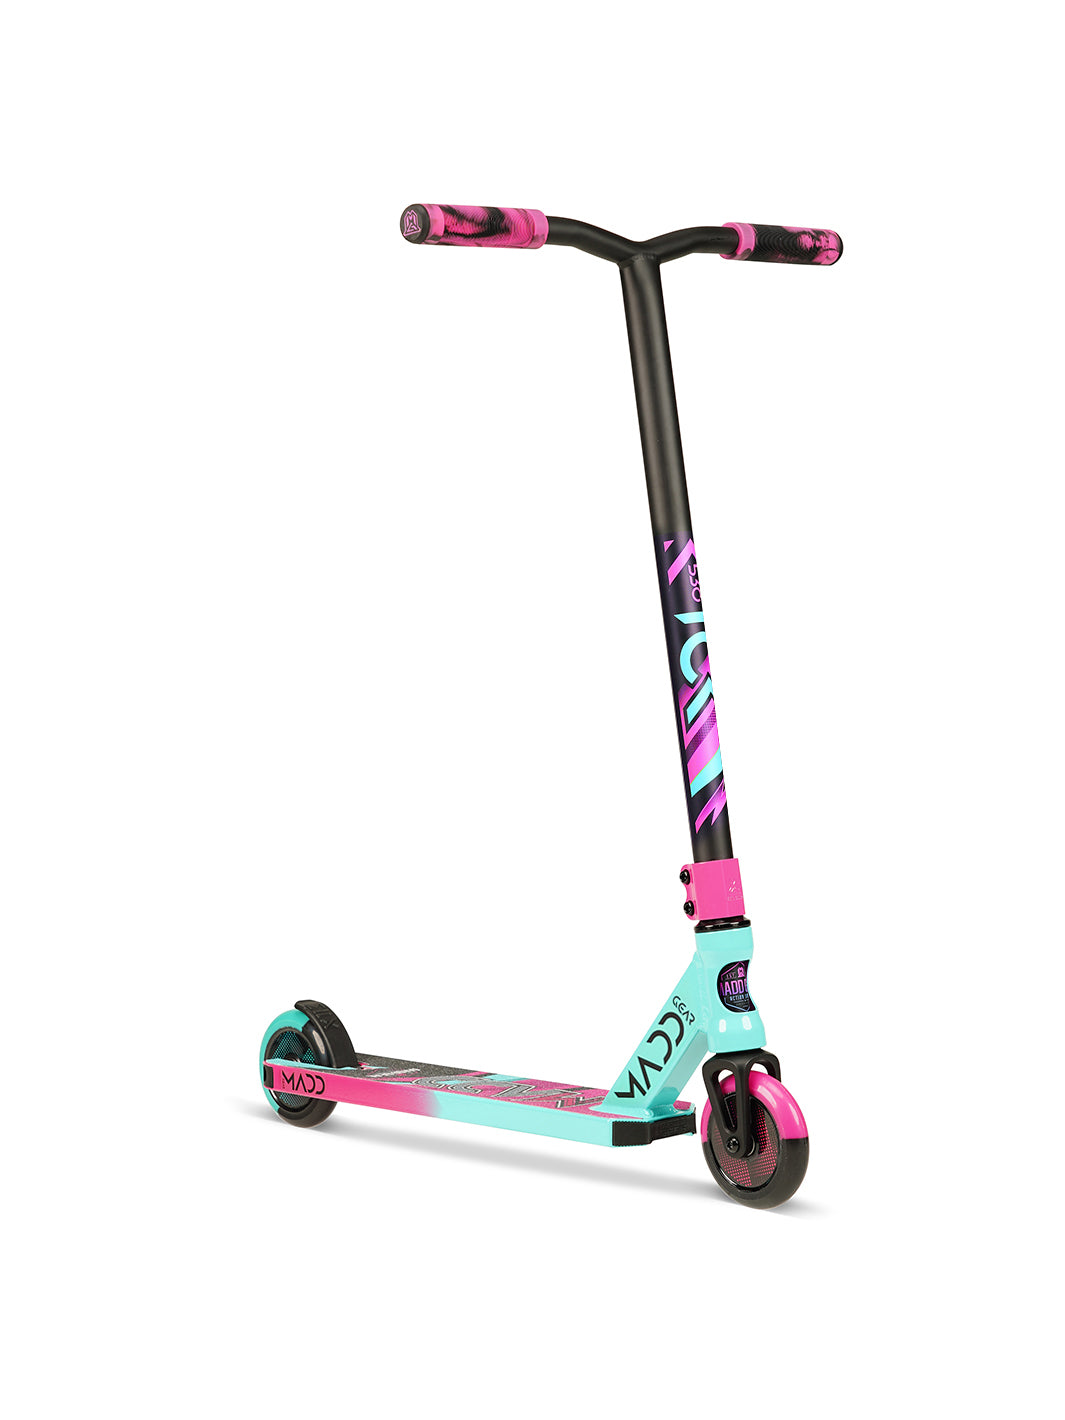 Madd Gear Kick Pro Stunt Scooter Teal Pink Complete Strong Best